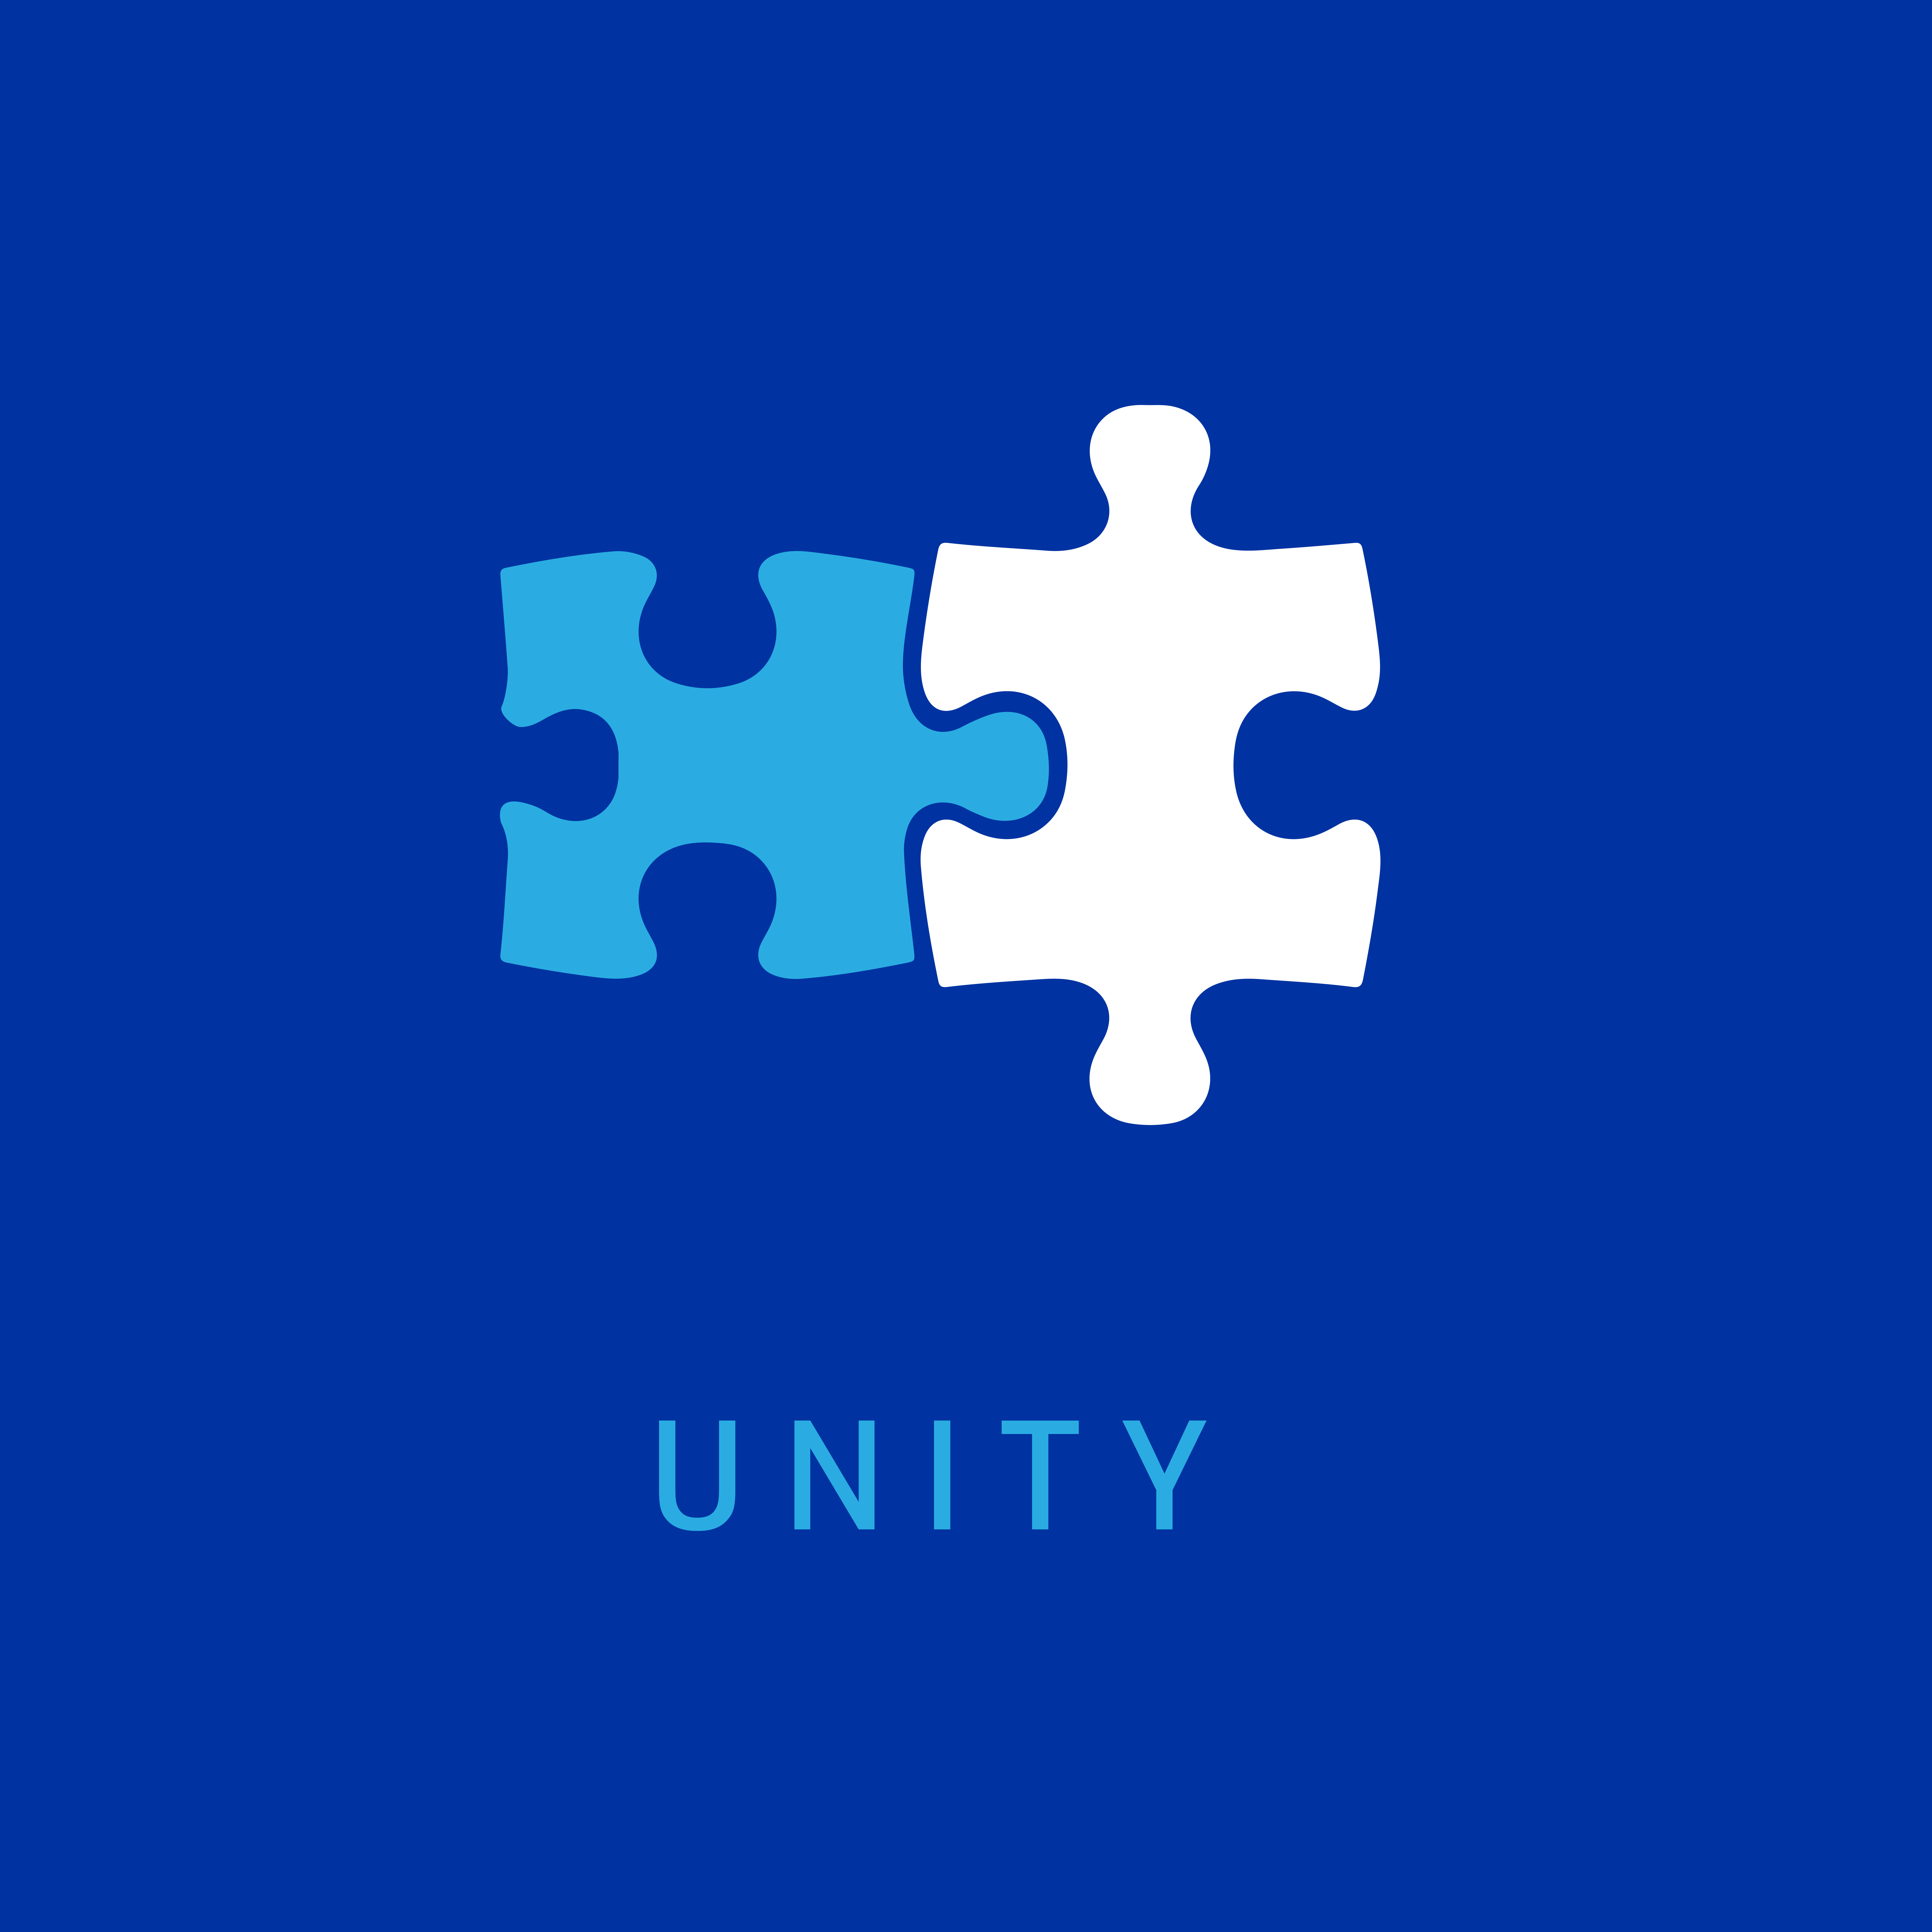 MiTek's guiding principle of unity - A square graphic of two puzzle pieces of different colors, interlocked and connected